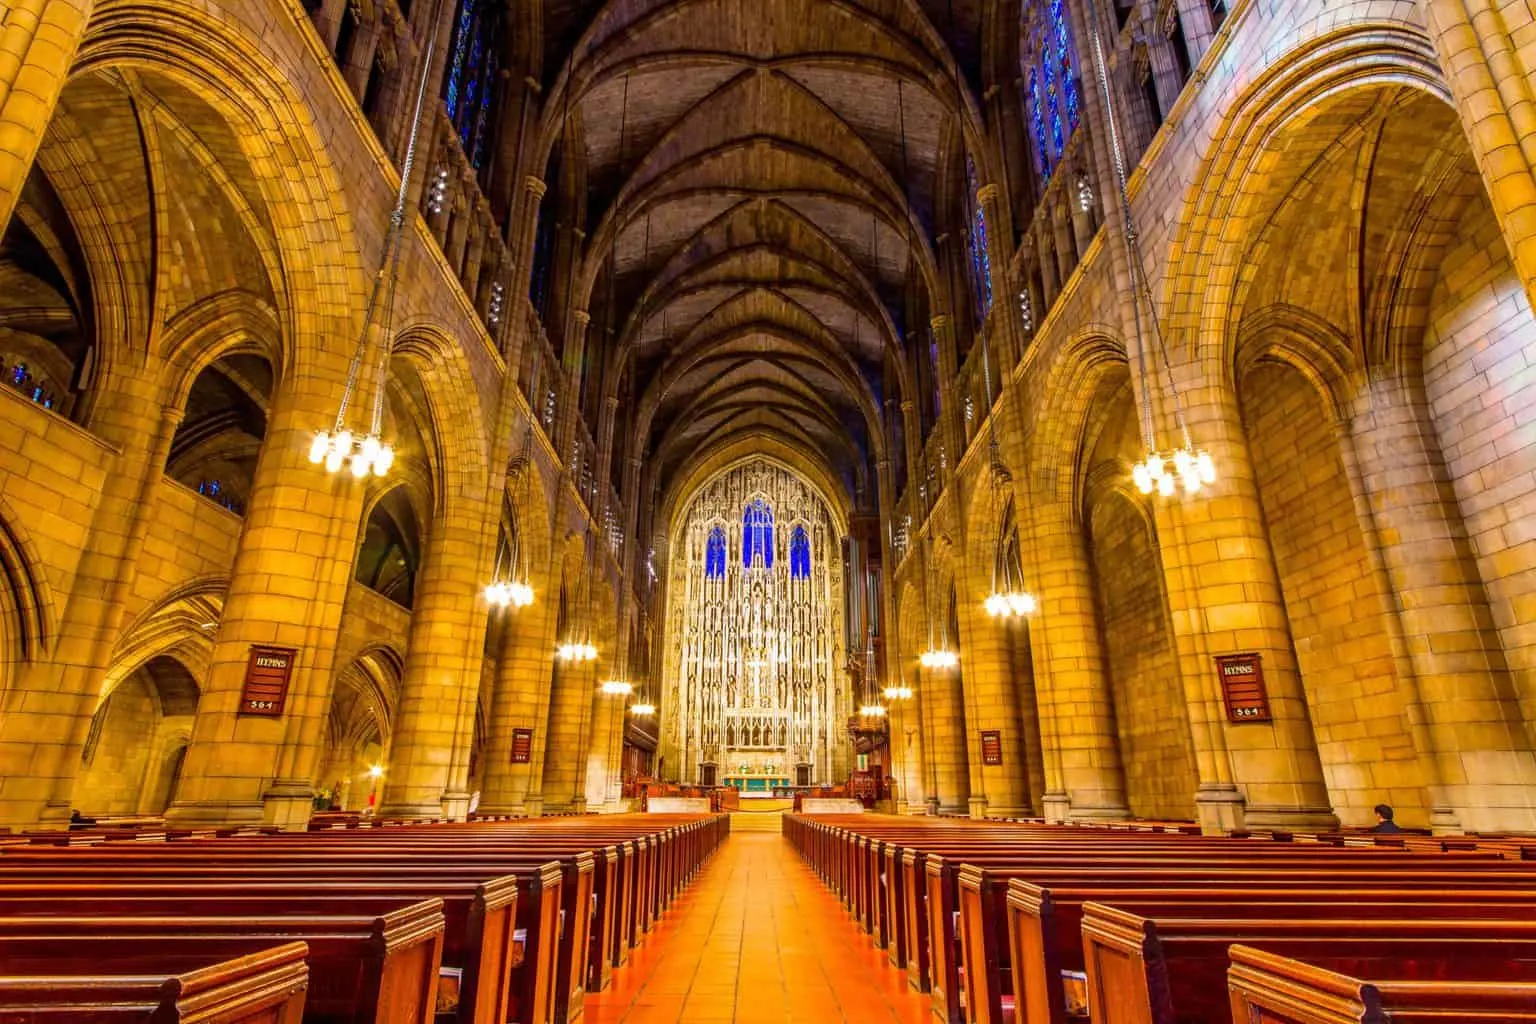 The gorgeous, French High Gothic style interior of St. Thomas on Fifth Avenue Church (image sourced from Flickr.com). 